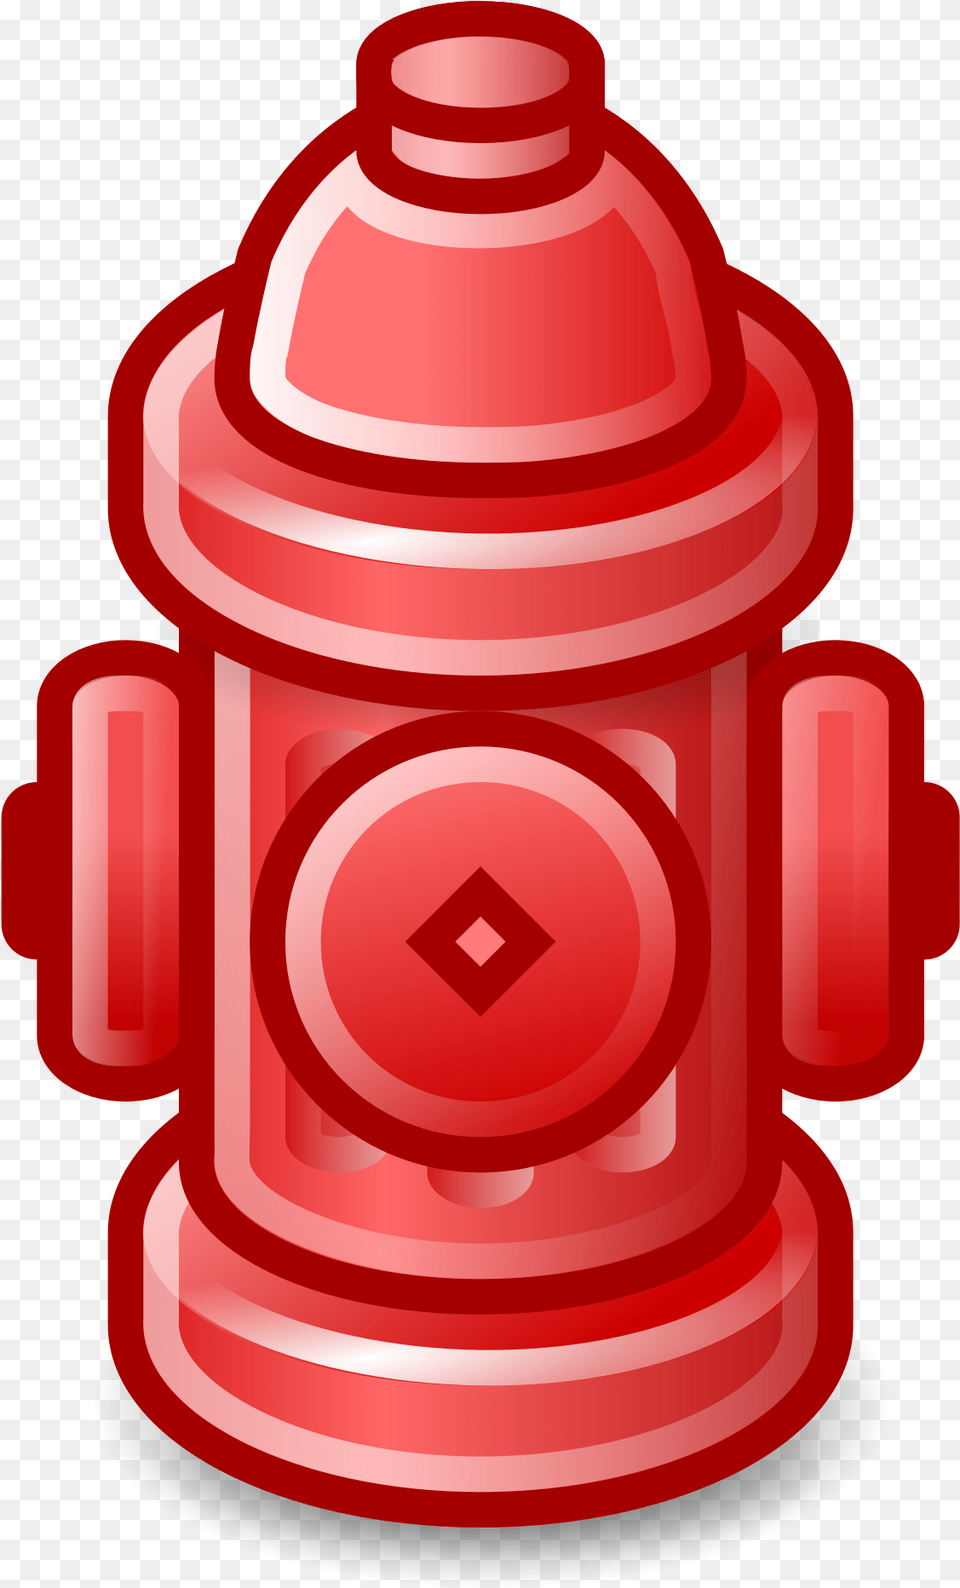 Fire Hydrant Image Fire Hydrant, Fire Hydrant, Dynamite, Weapon Png